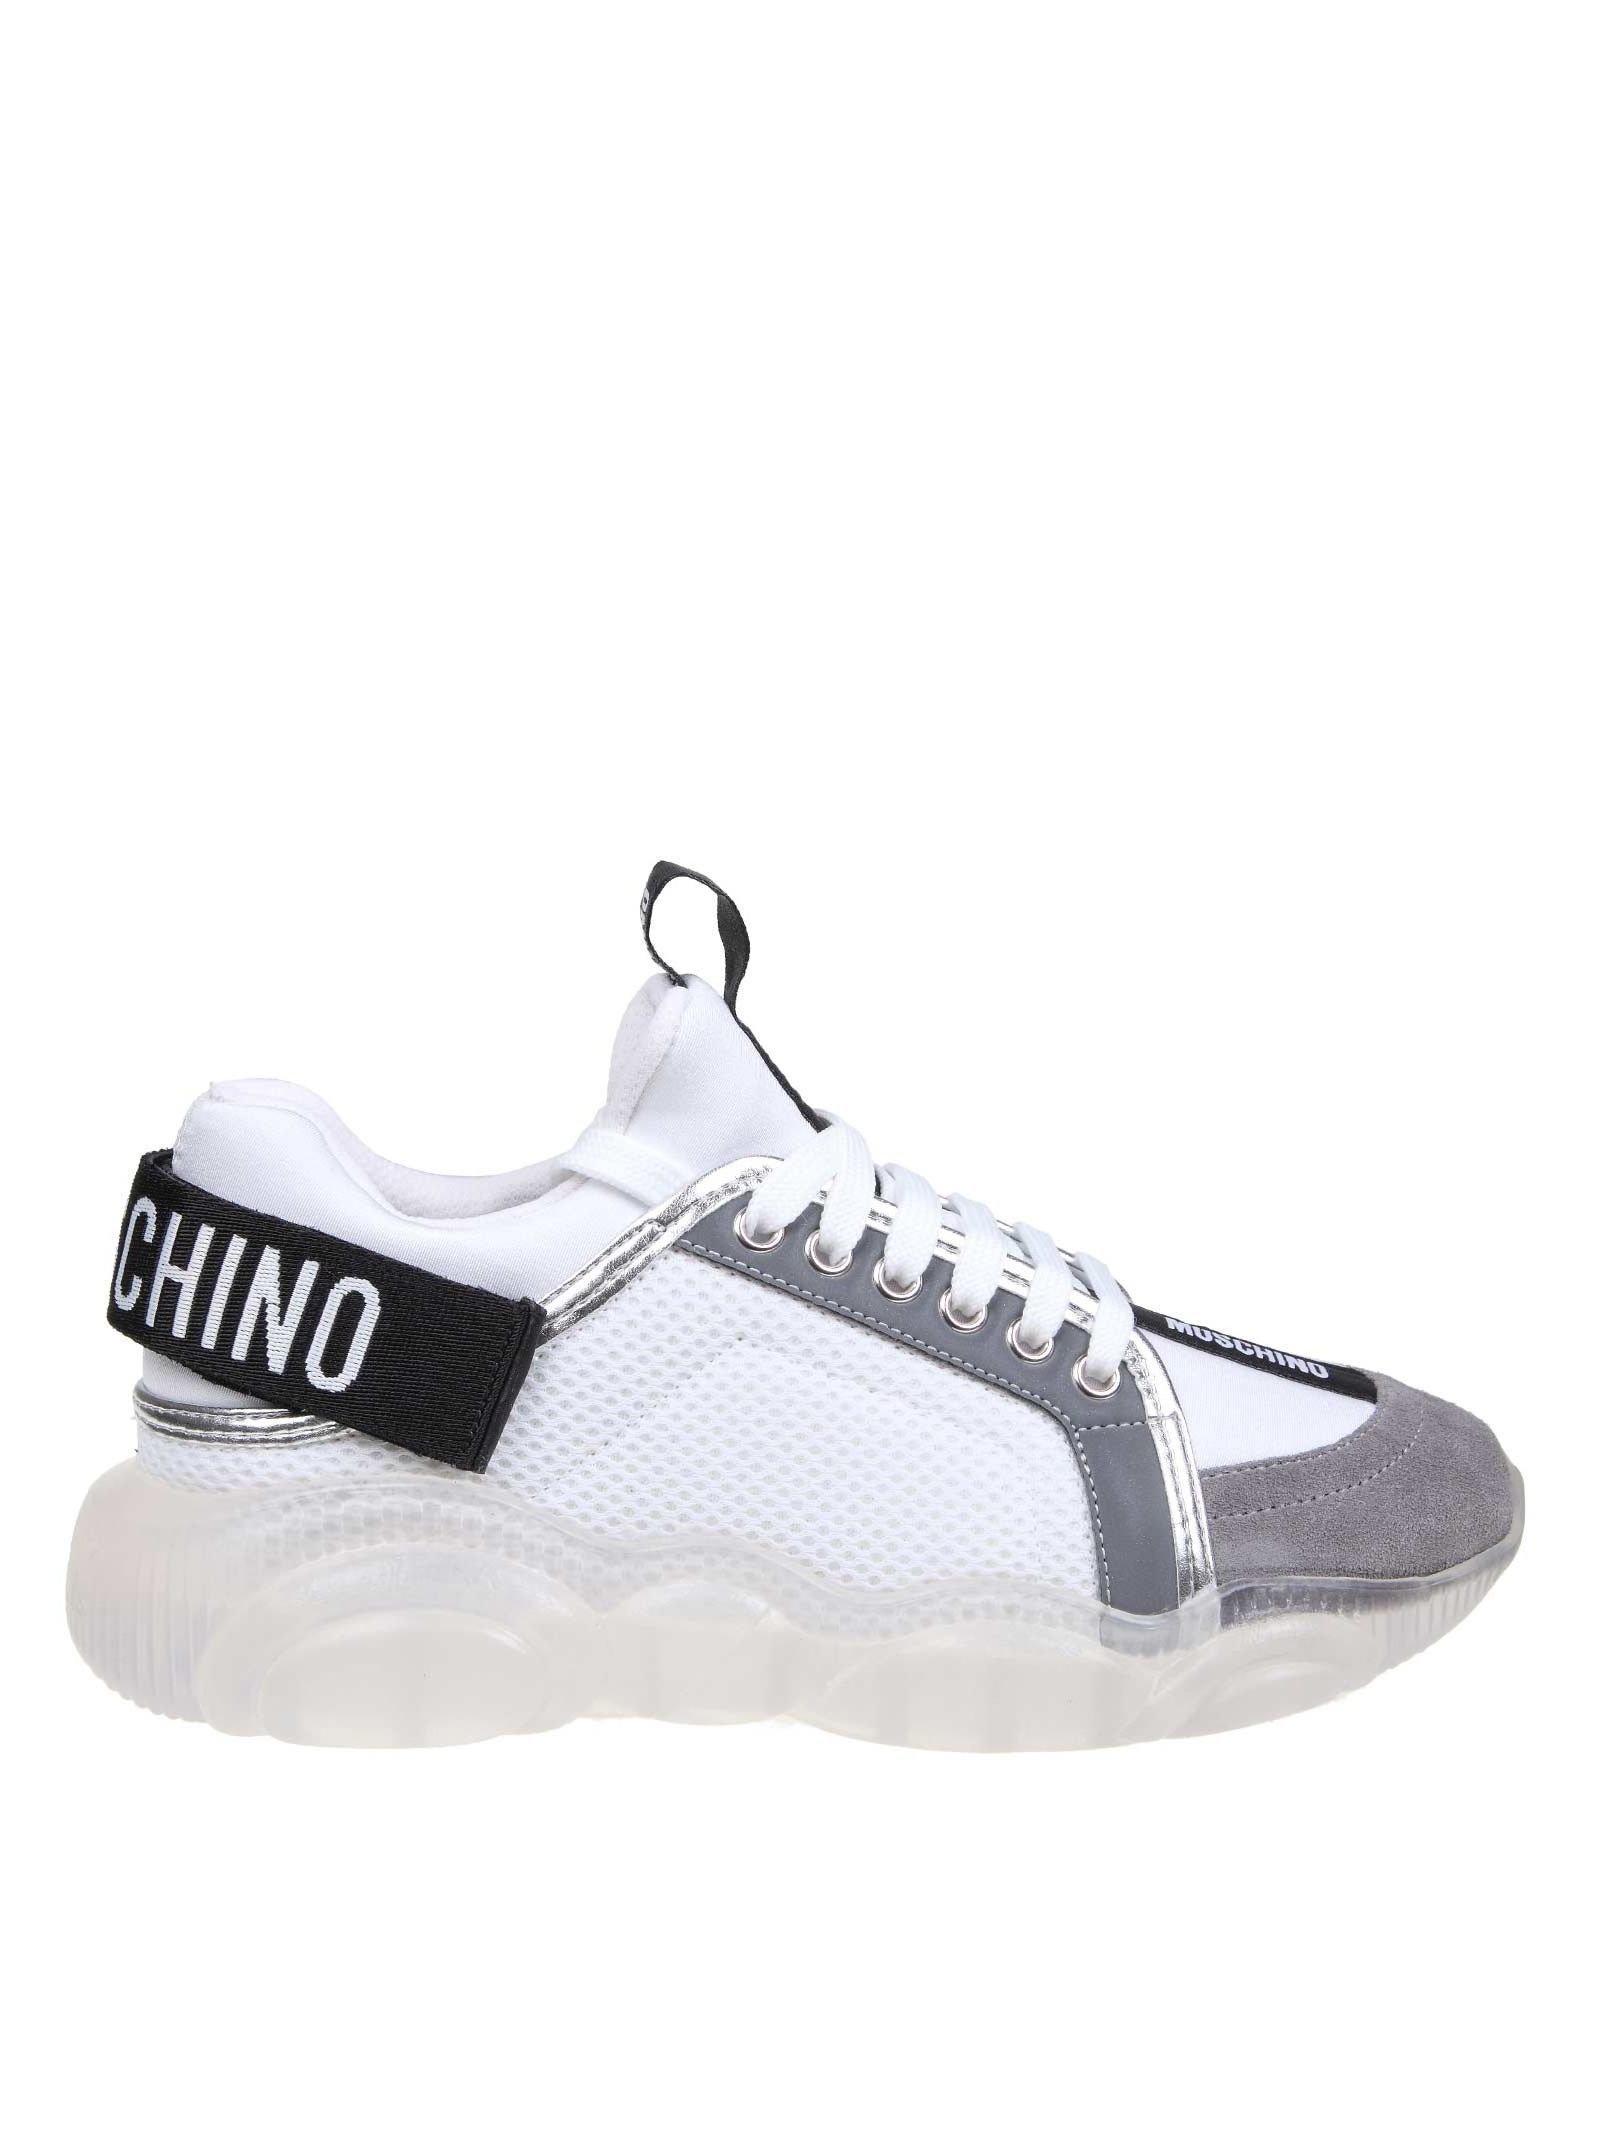 MOSCHINO SNEAKERS TEDDY RUN WITH STRAP COLOR WHITE / GRAY,10860026